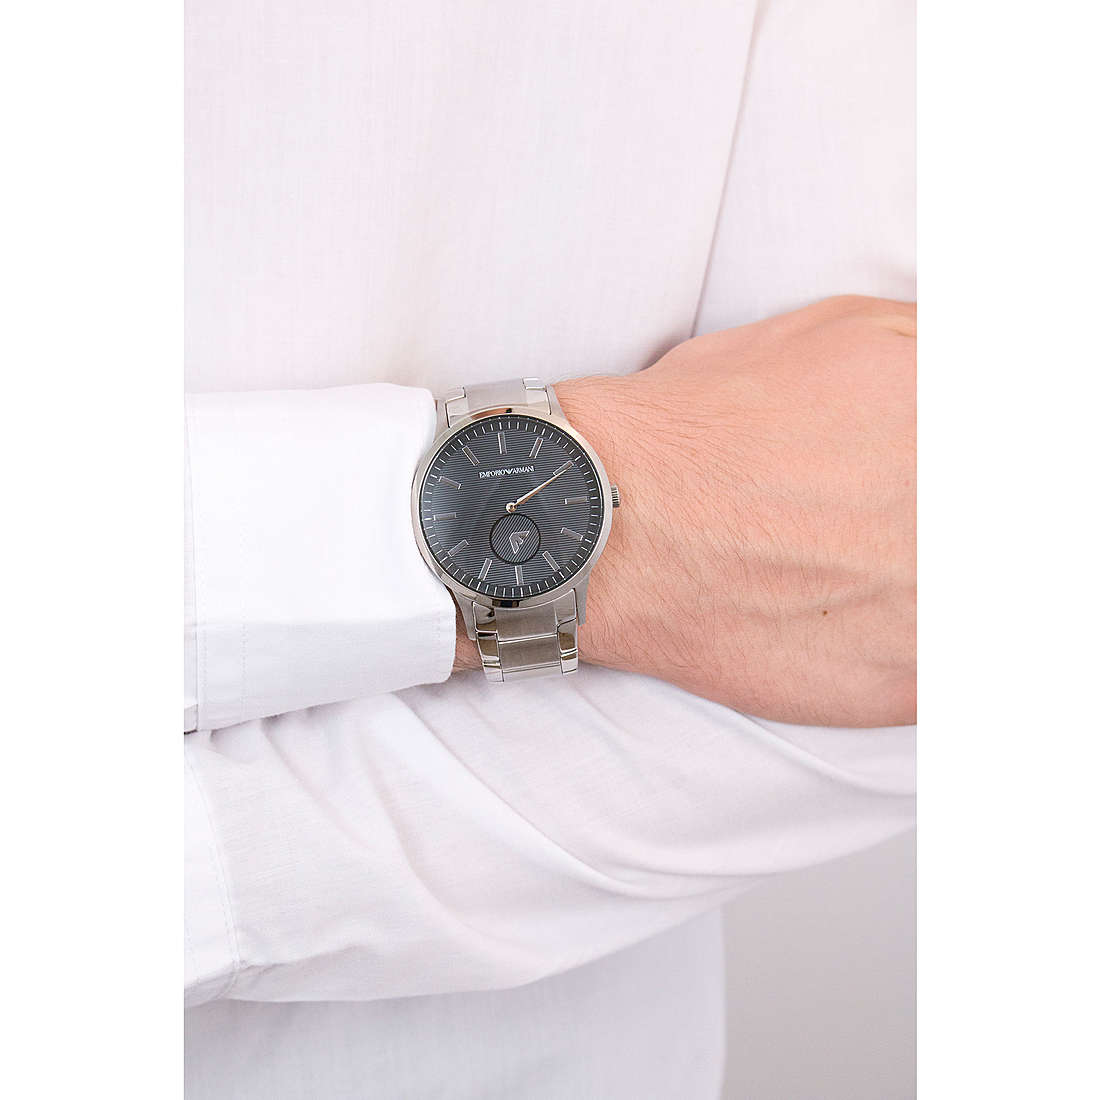 Emporio Armani only time man AR11118 wearing